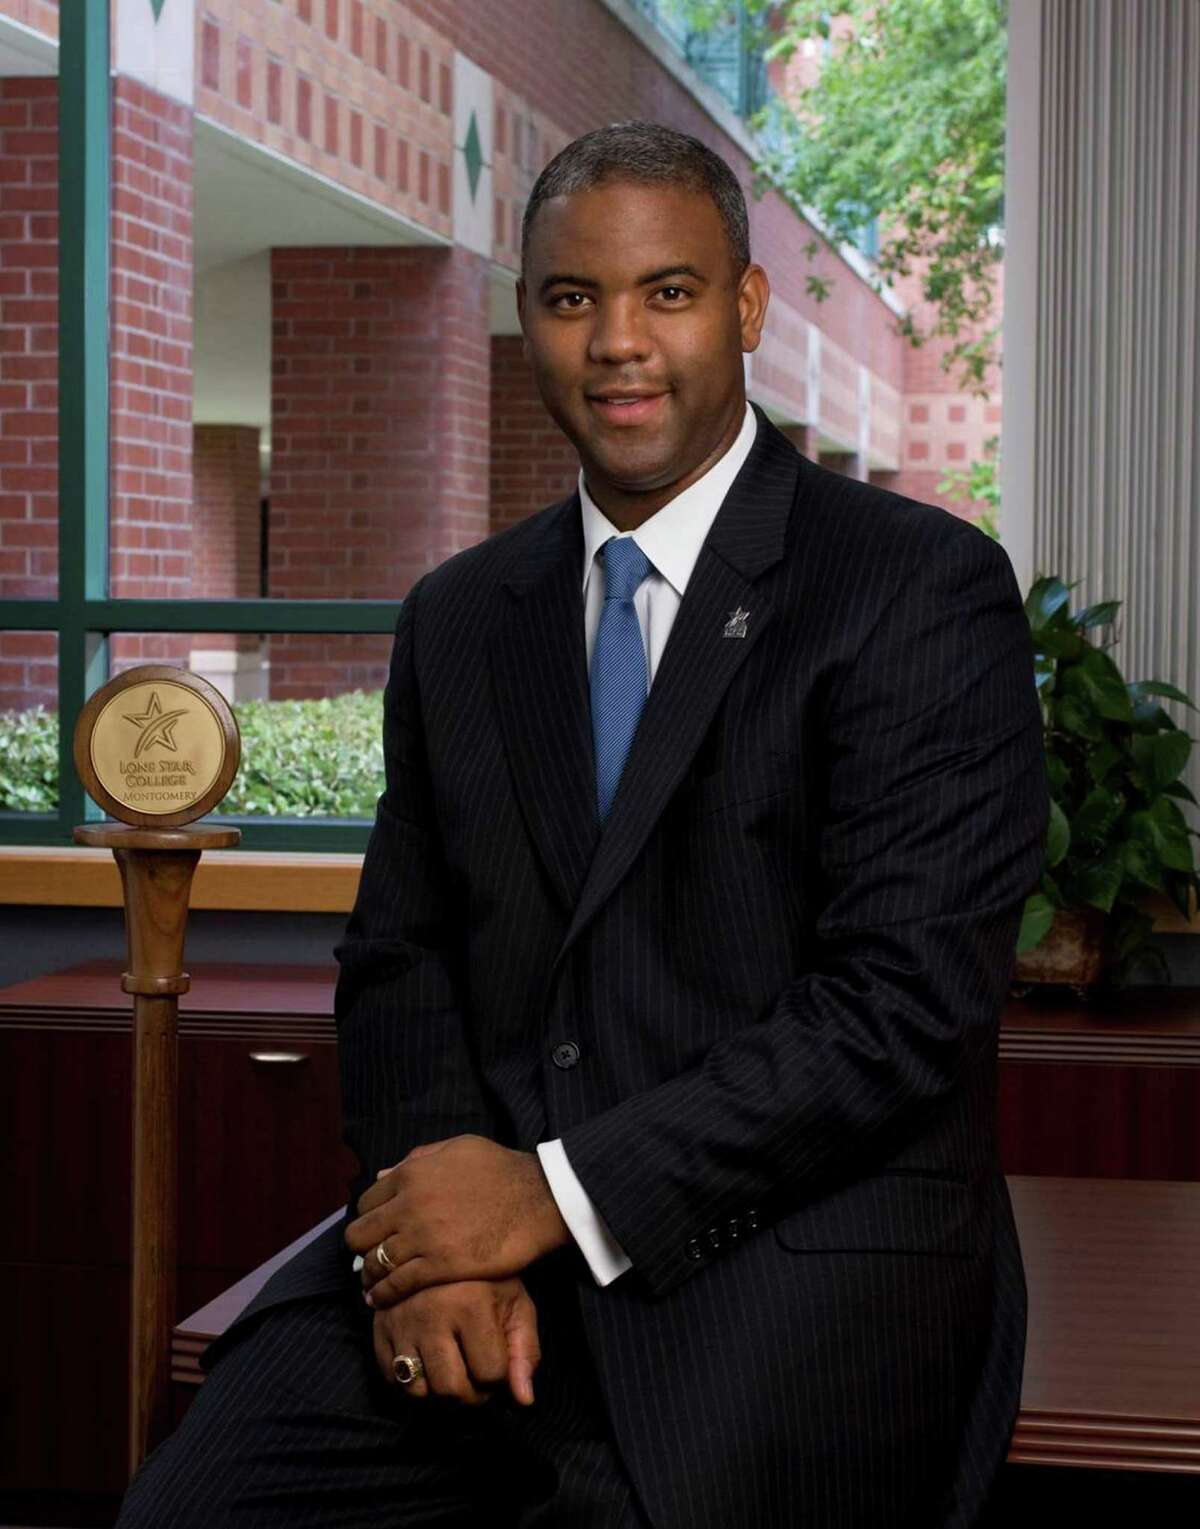 Texas Southern University's incoming president Austin Lane served as vice chancellor at Lone Star College.